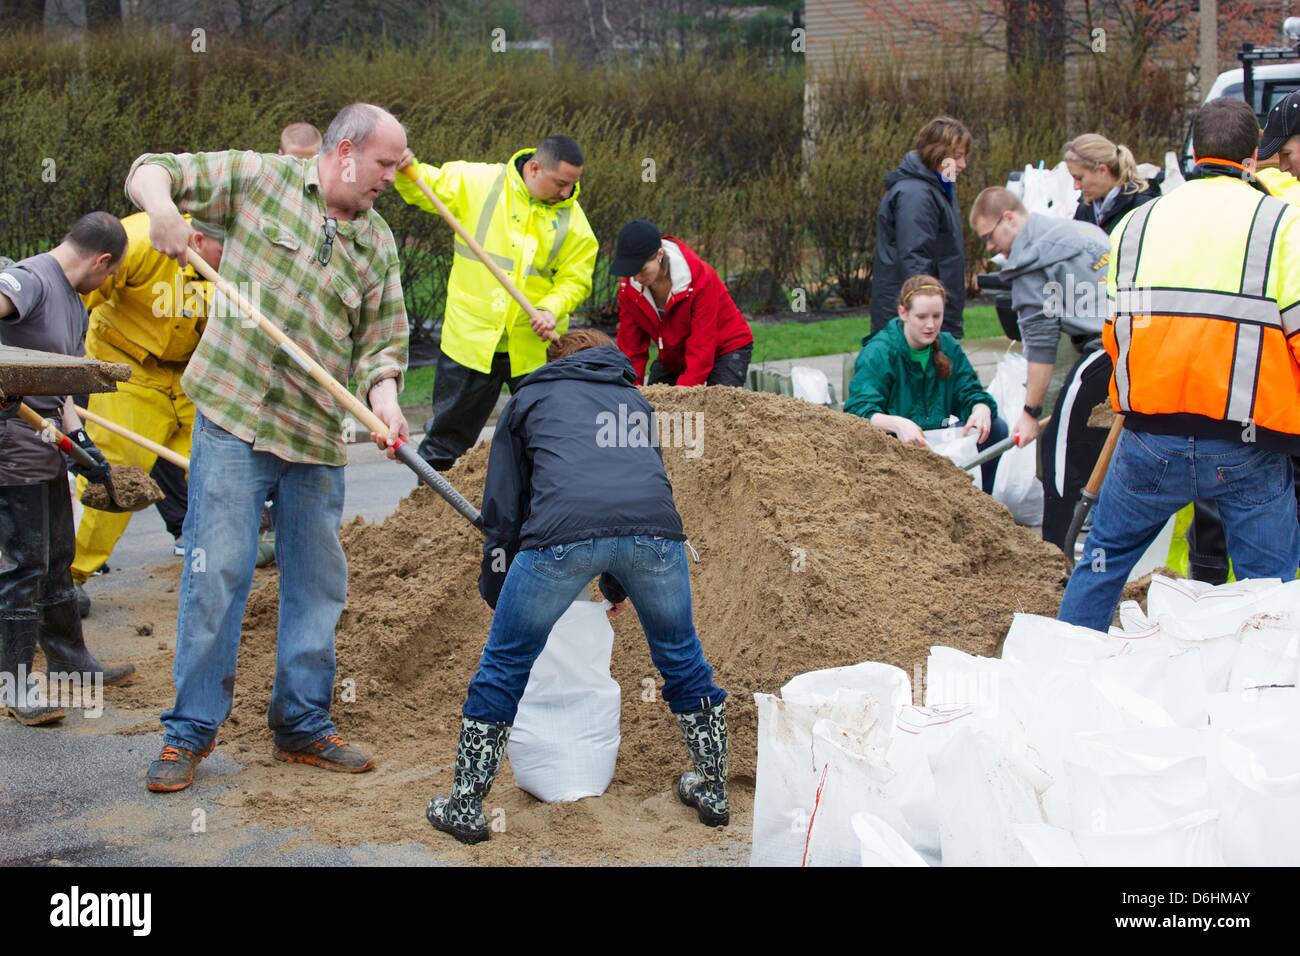 River Forest, Illinois, USA. 18th April 2013.  Volunteers fill sandbags on River Oaks Drive adjacent to the Des Plaines River. The river is expected to flood to record levels due to heavy rains. . Stock Photo